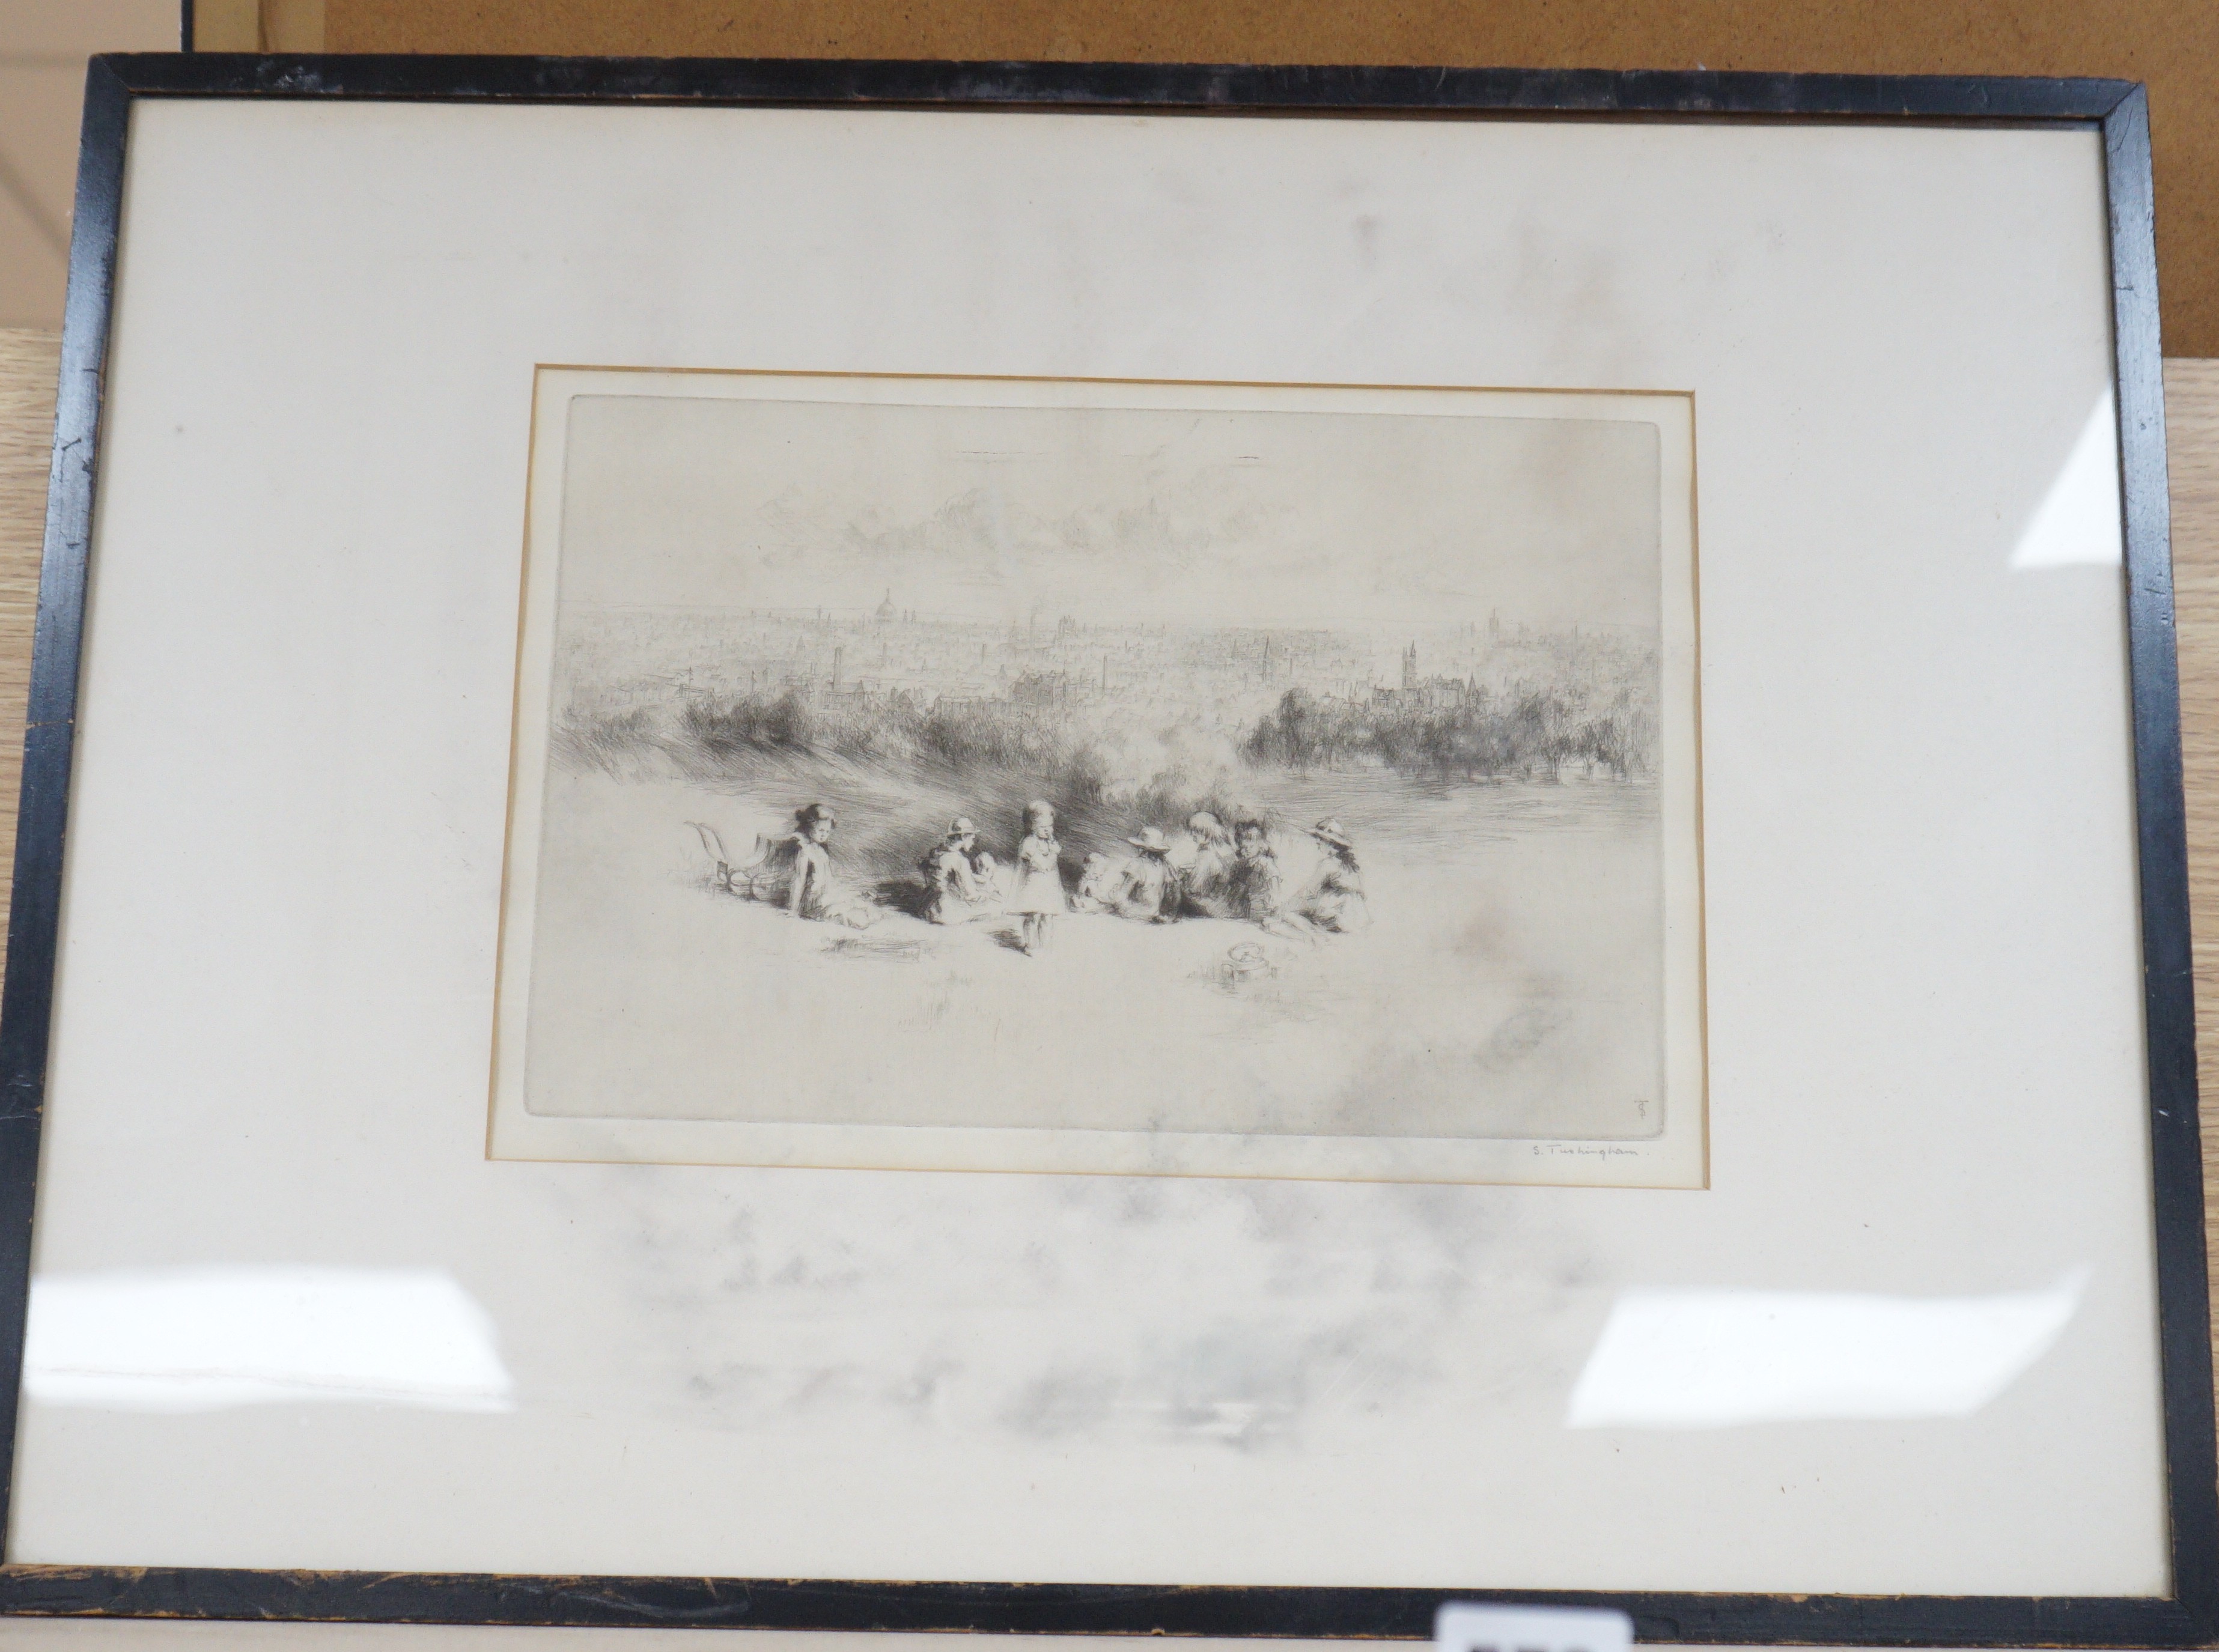 Sidney Tushingham (1884-1968), etching, 'The Picnic', signed in pencil, 19 x 28cm